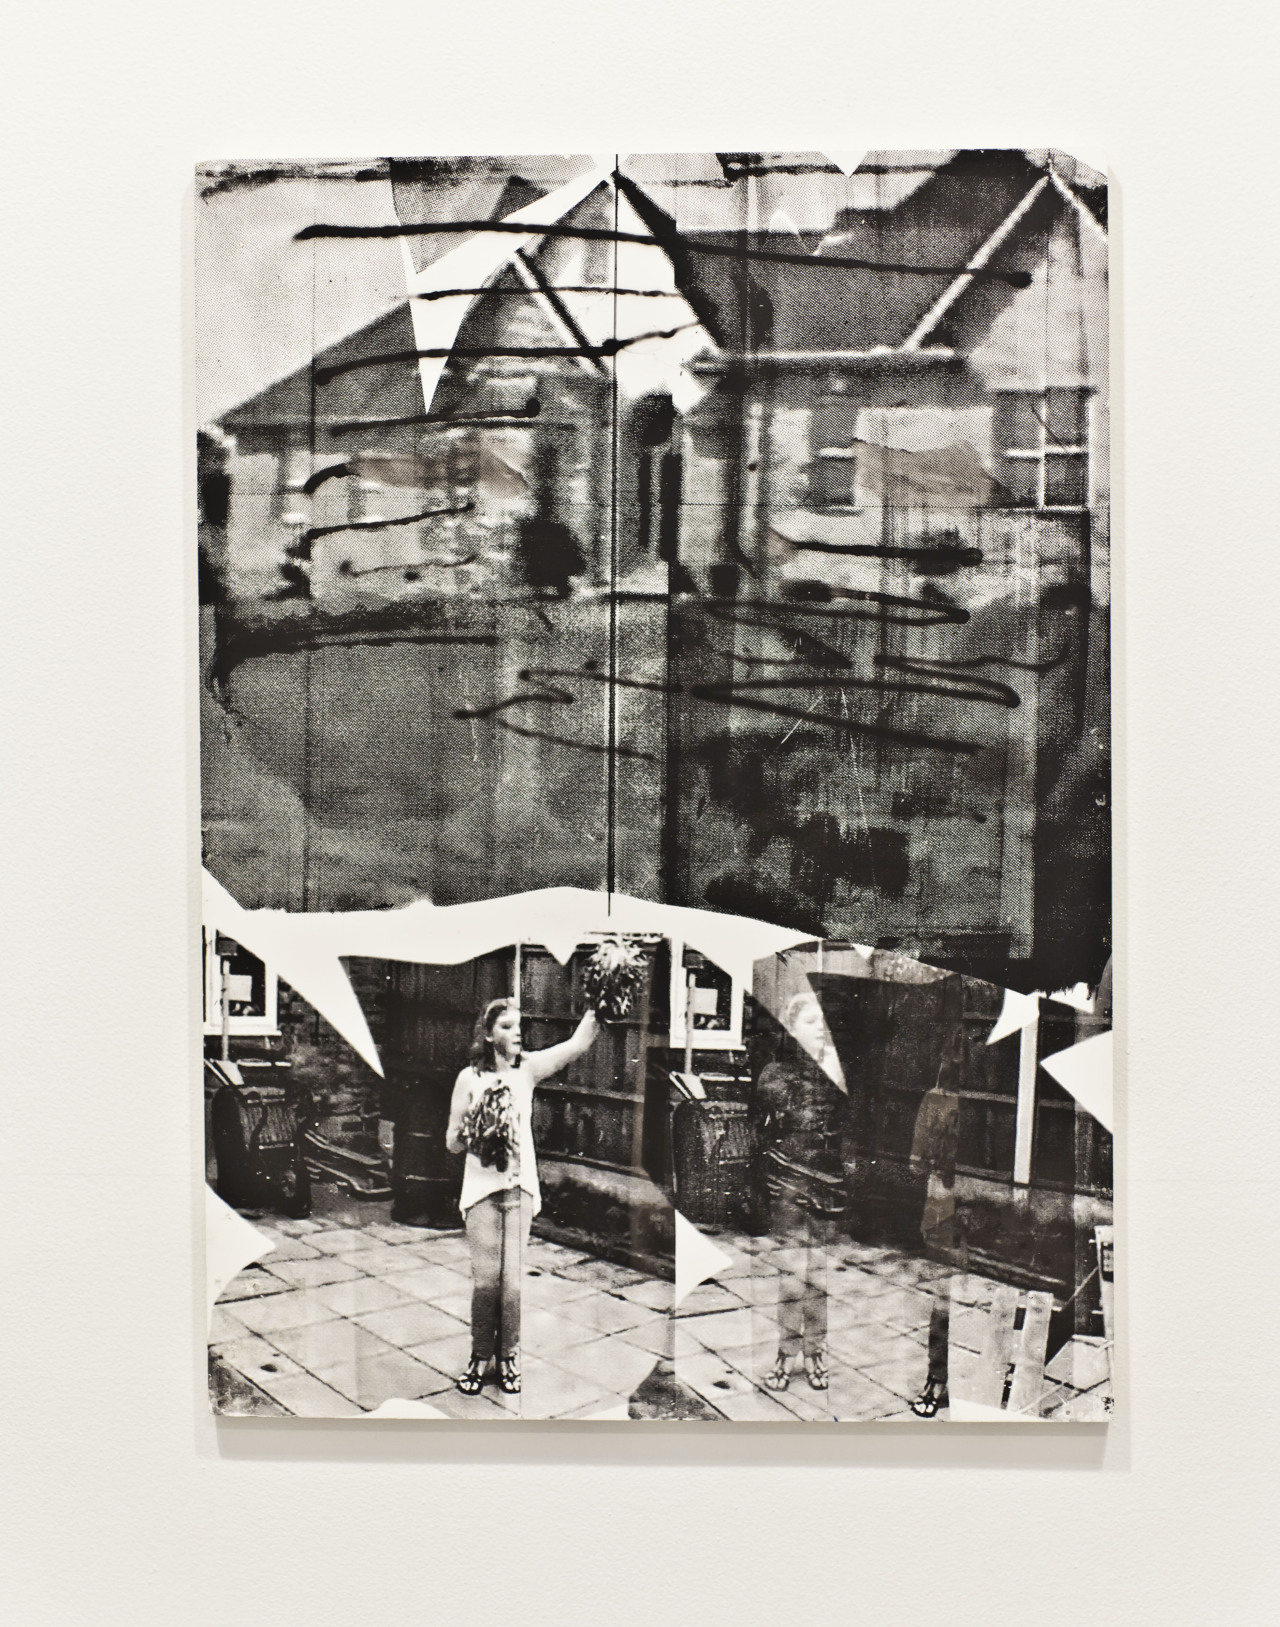 Leo Gabin
Untitled (Black and White House), 2013
Silkscreen and spray-paint on Trovitex PVC foam-board
39.37 x 28.35 inches (100 x 72 cm) Image courtesy of Elizabeth Dee Gallery    Leo Gabin have worked as a collective since the early 2000’s in a...